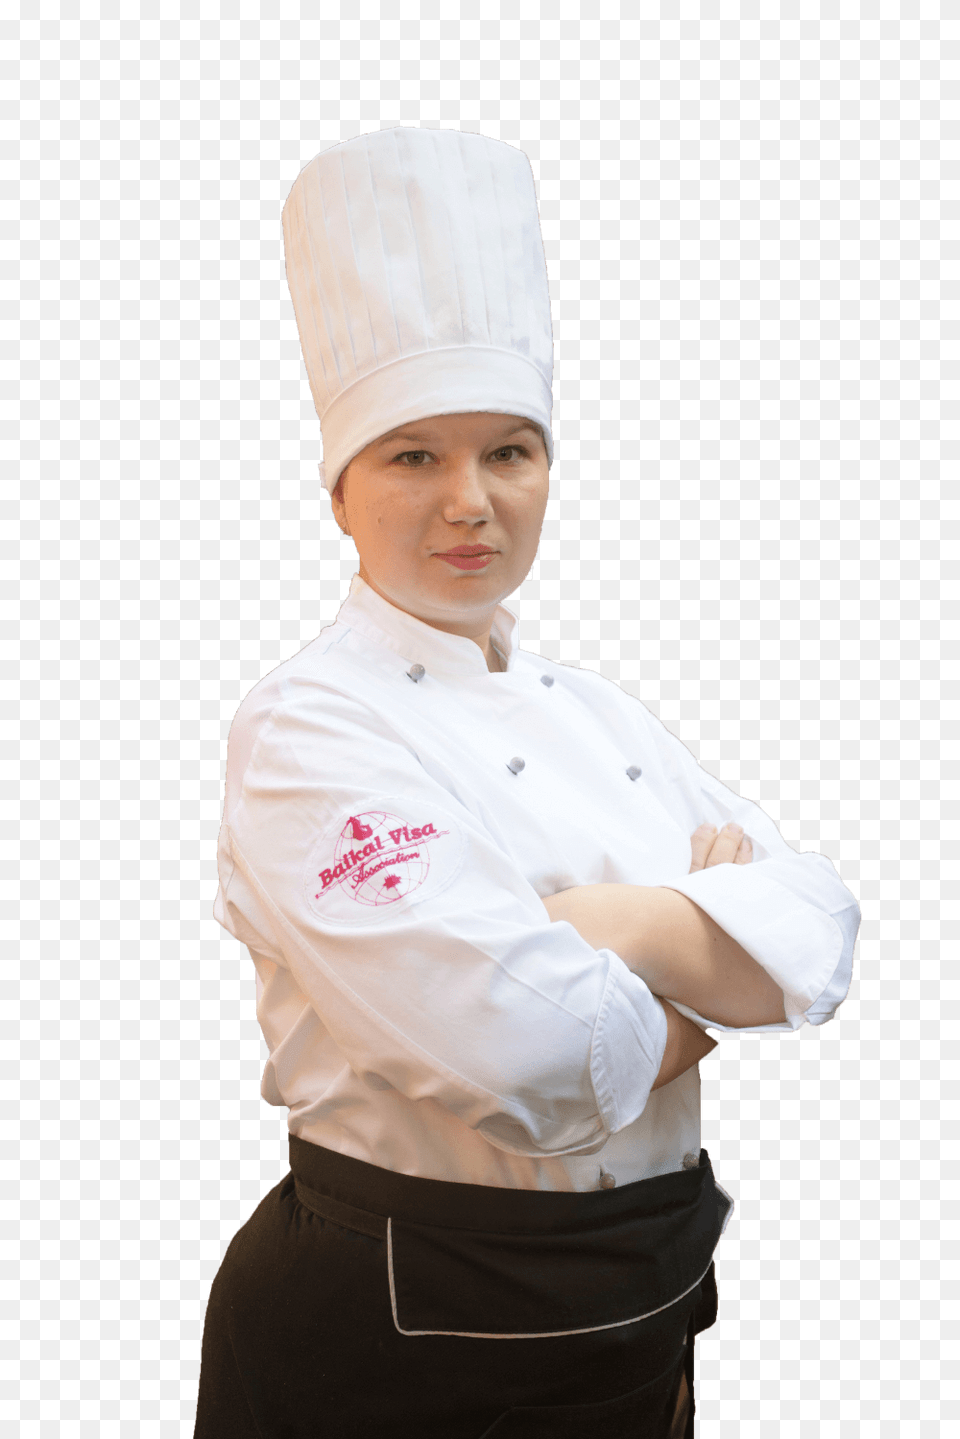 Chef, Person, Clothing, Culinary, Shirt Png